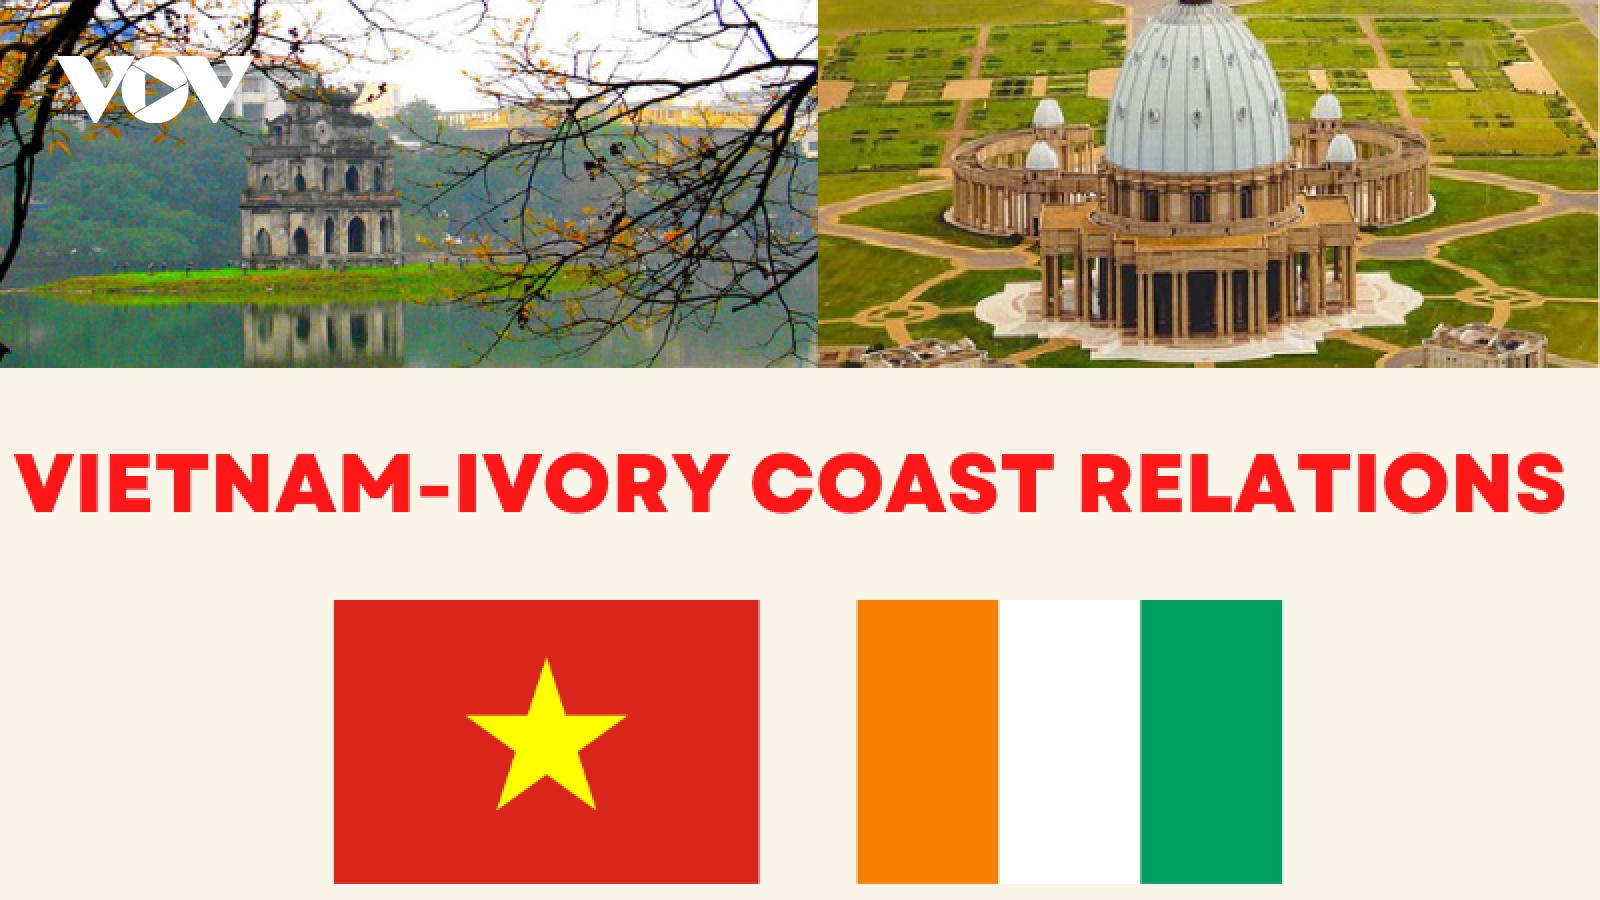 Vietnam-Ivory Coast relations at a glance